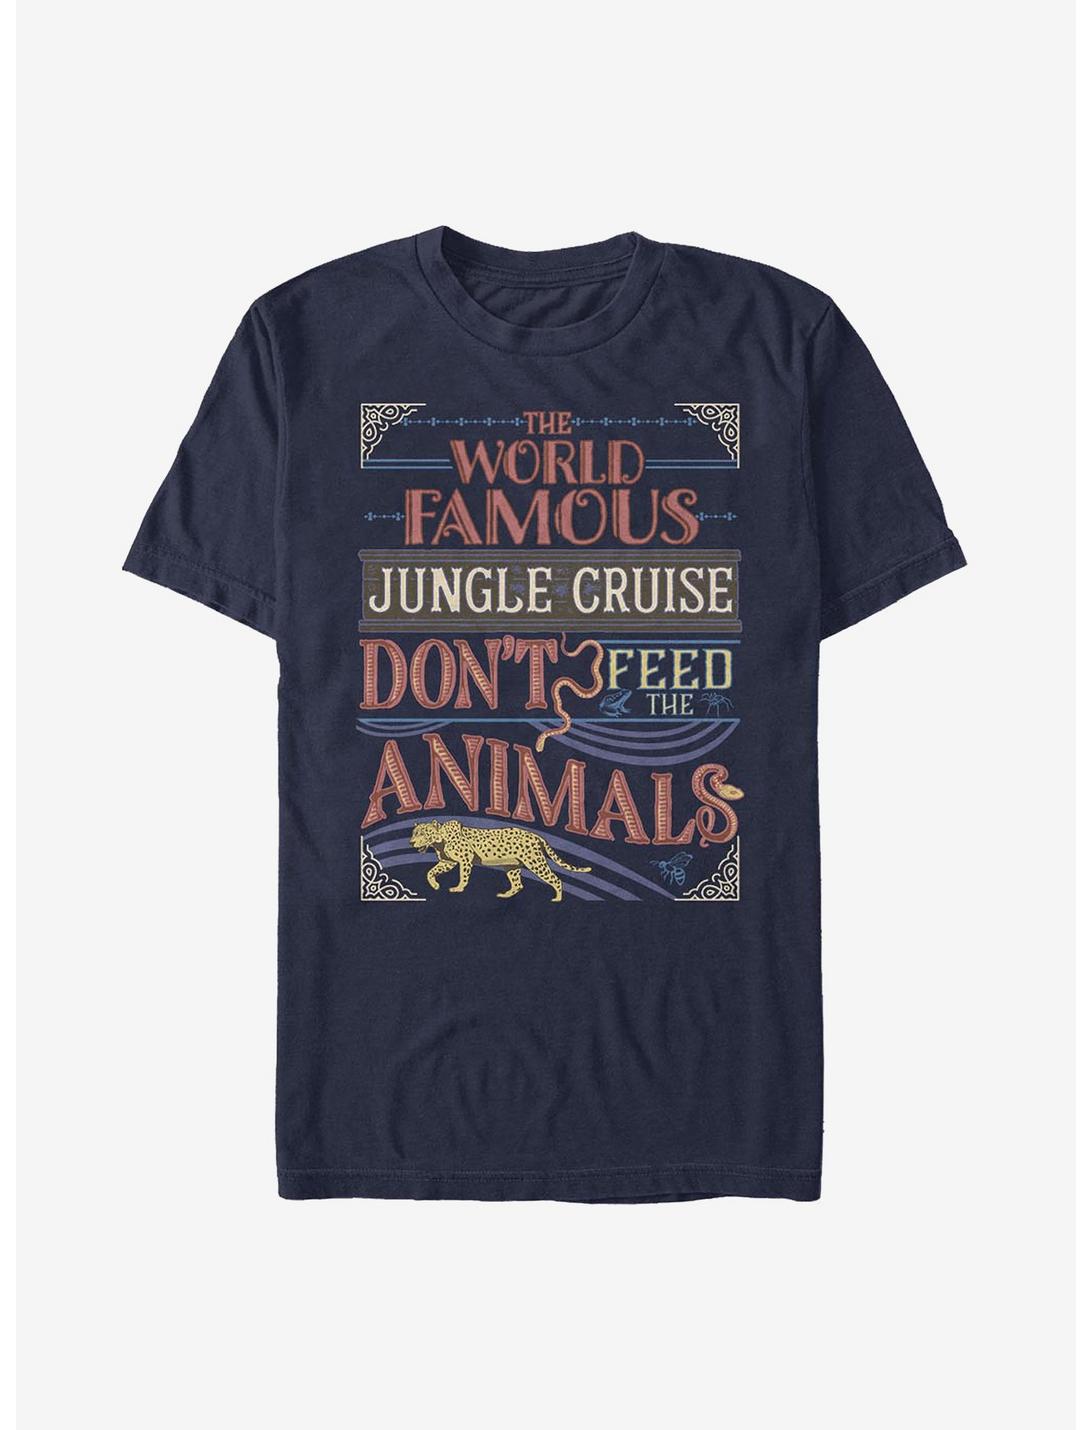 Disney Jungle Cruise The World Famous Jungle Cruise Don't Feed The Animals T-Shirt, NAVY, hi-res